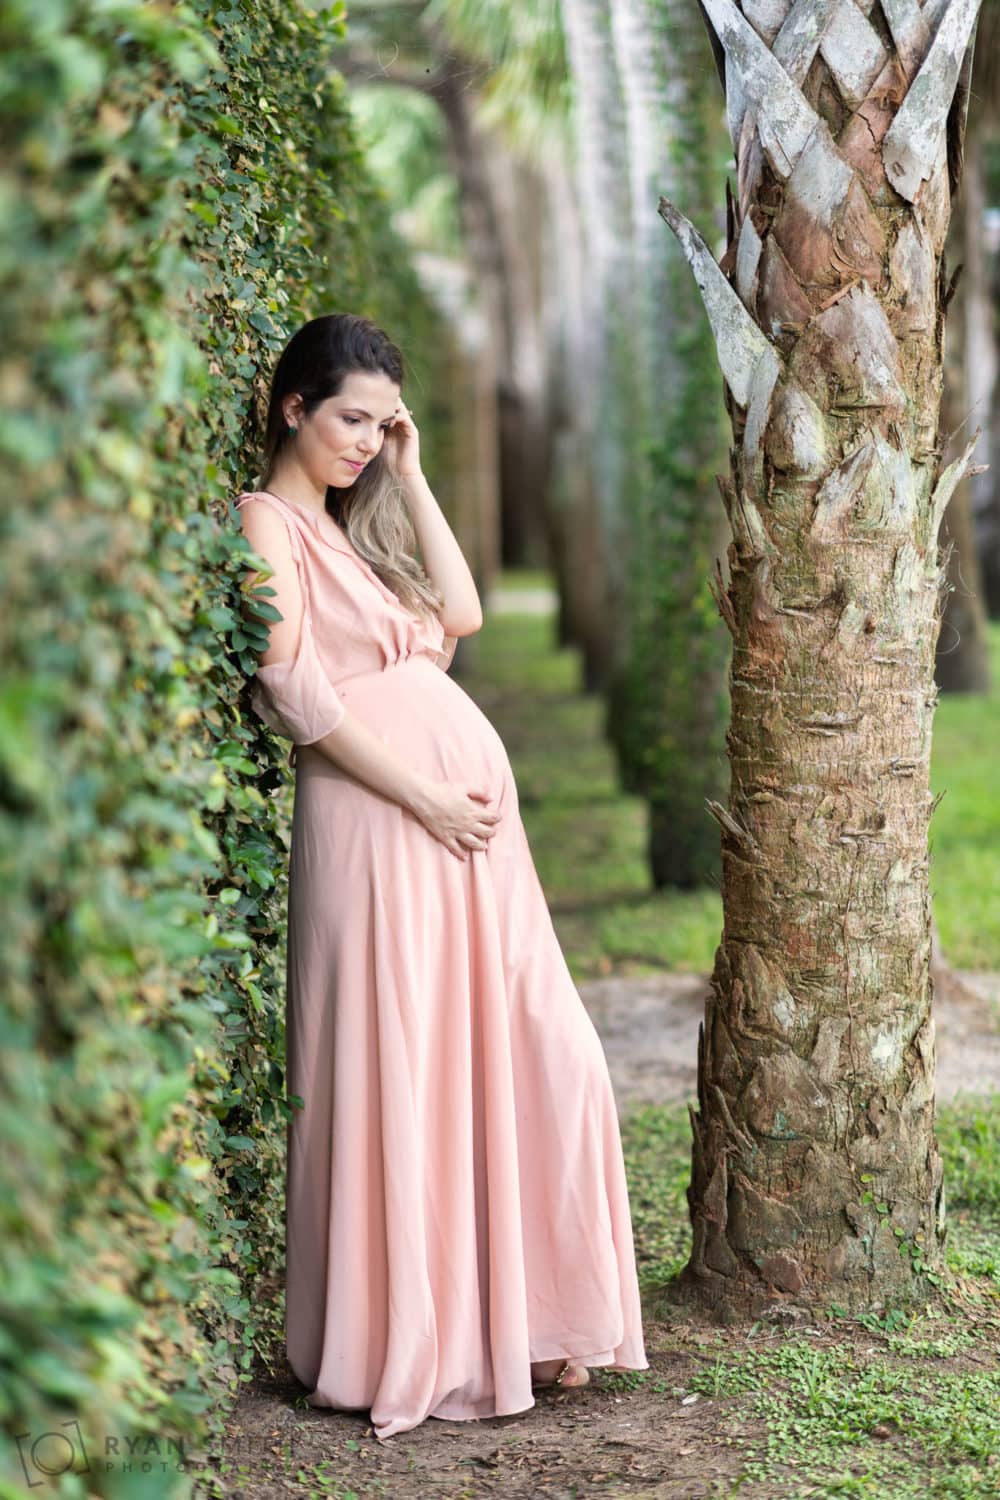 Maternity portraits leaning against the ivy wall - Atalaya Castle